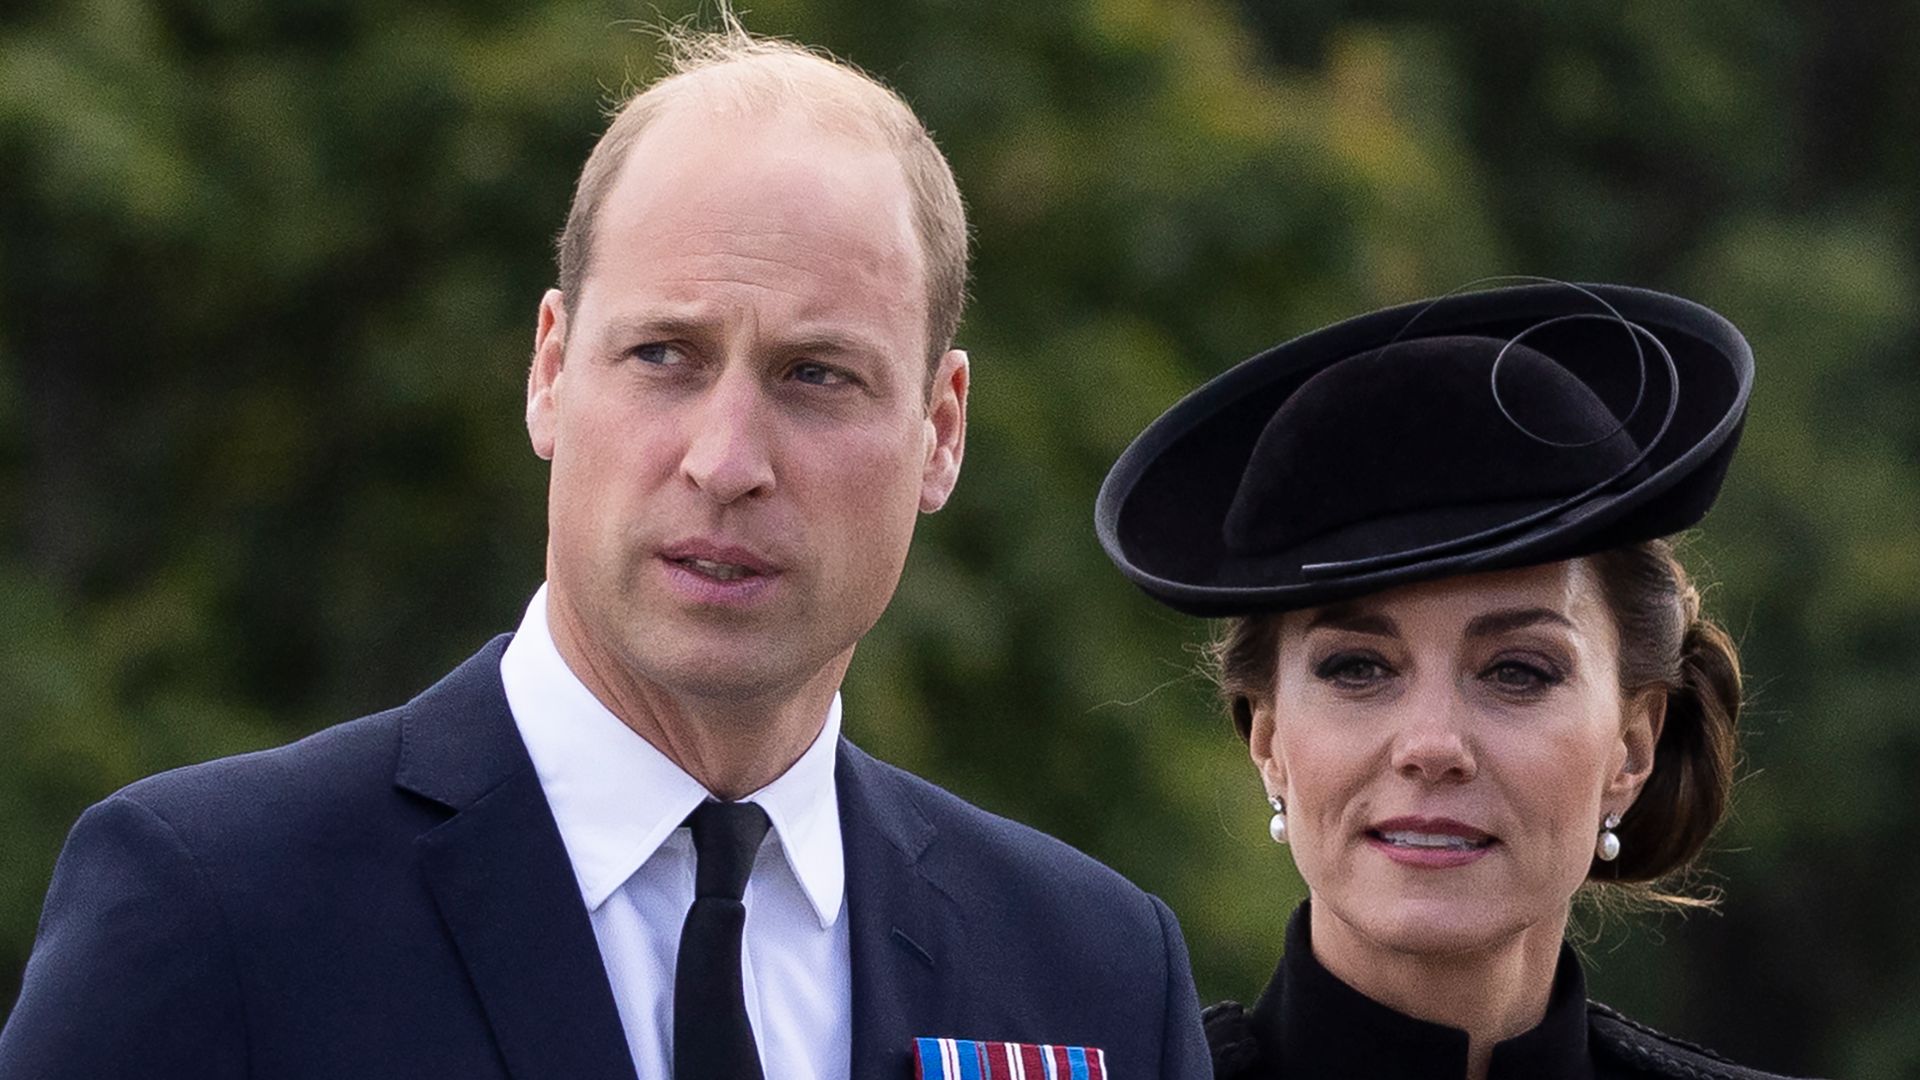 Prince William and Kate Middleton visit Army Training Centre Pirbright